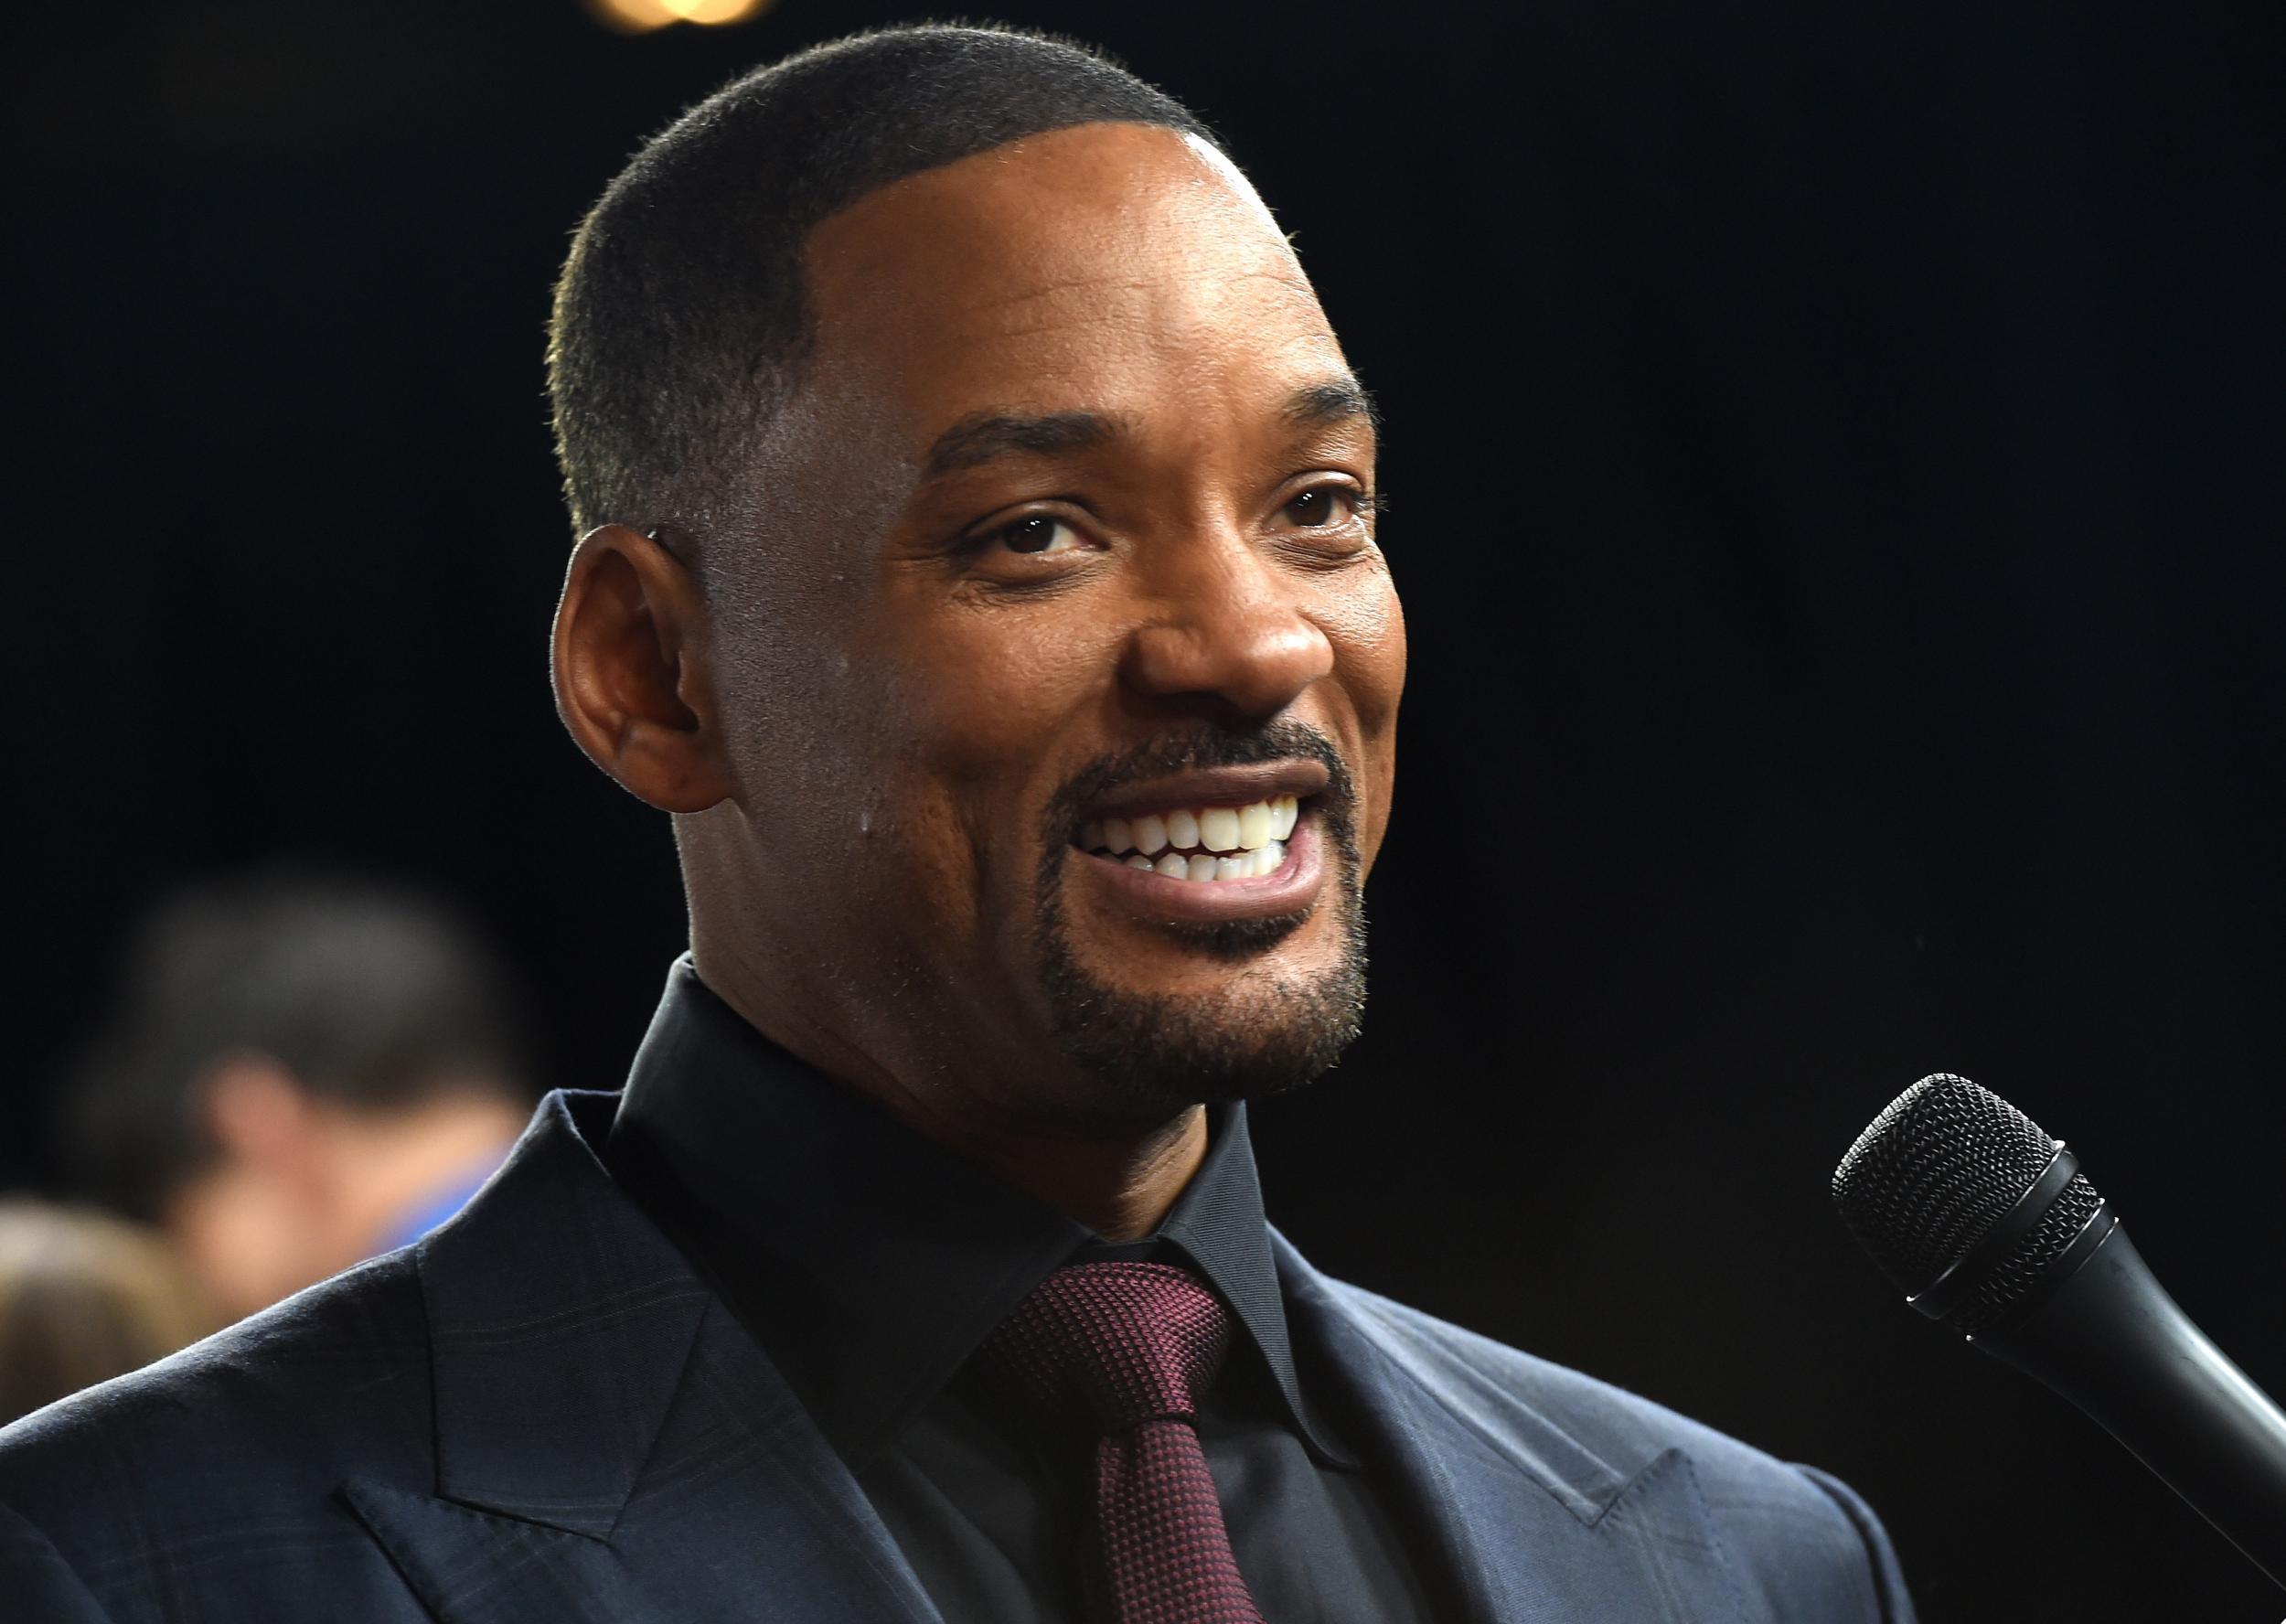 Actor Will Smith attends the Centerpiece Gala Premiere of Columbia Pictures' 'Concussion' during AFI FEST 2015 presented by Audi at TCL Chinese Theatre on November 10, 2015 in Hollywood, California. Credit: Kevin Winter/Getty Images for AFI.